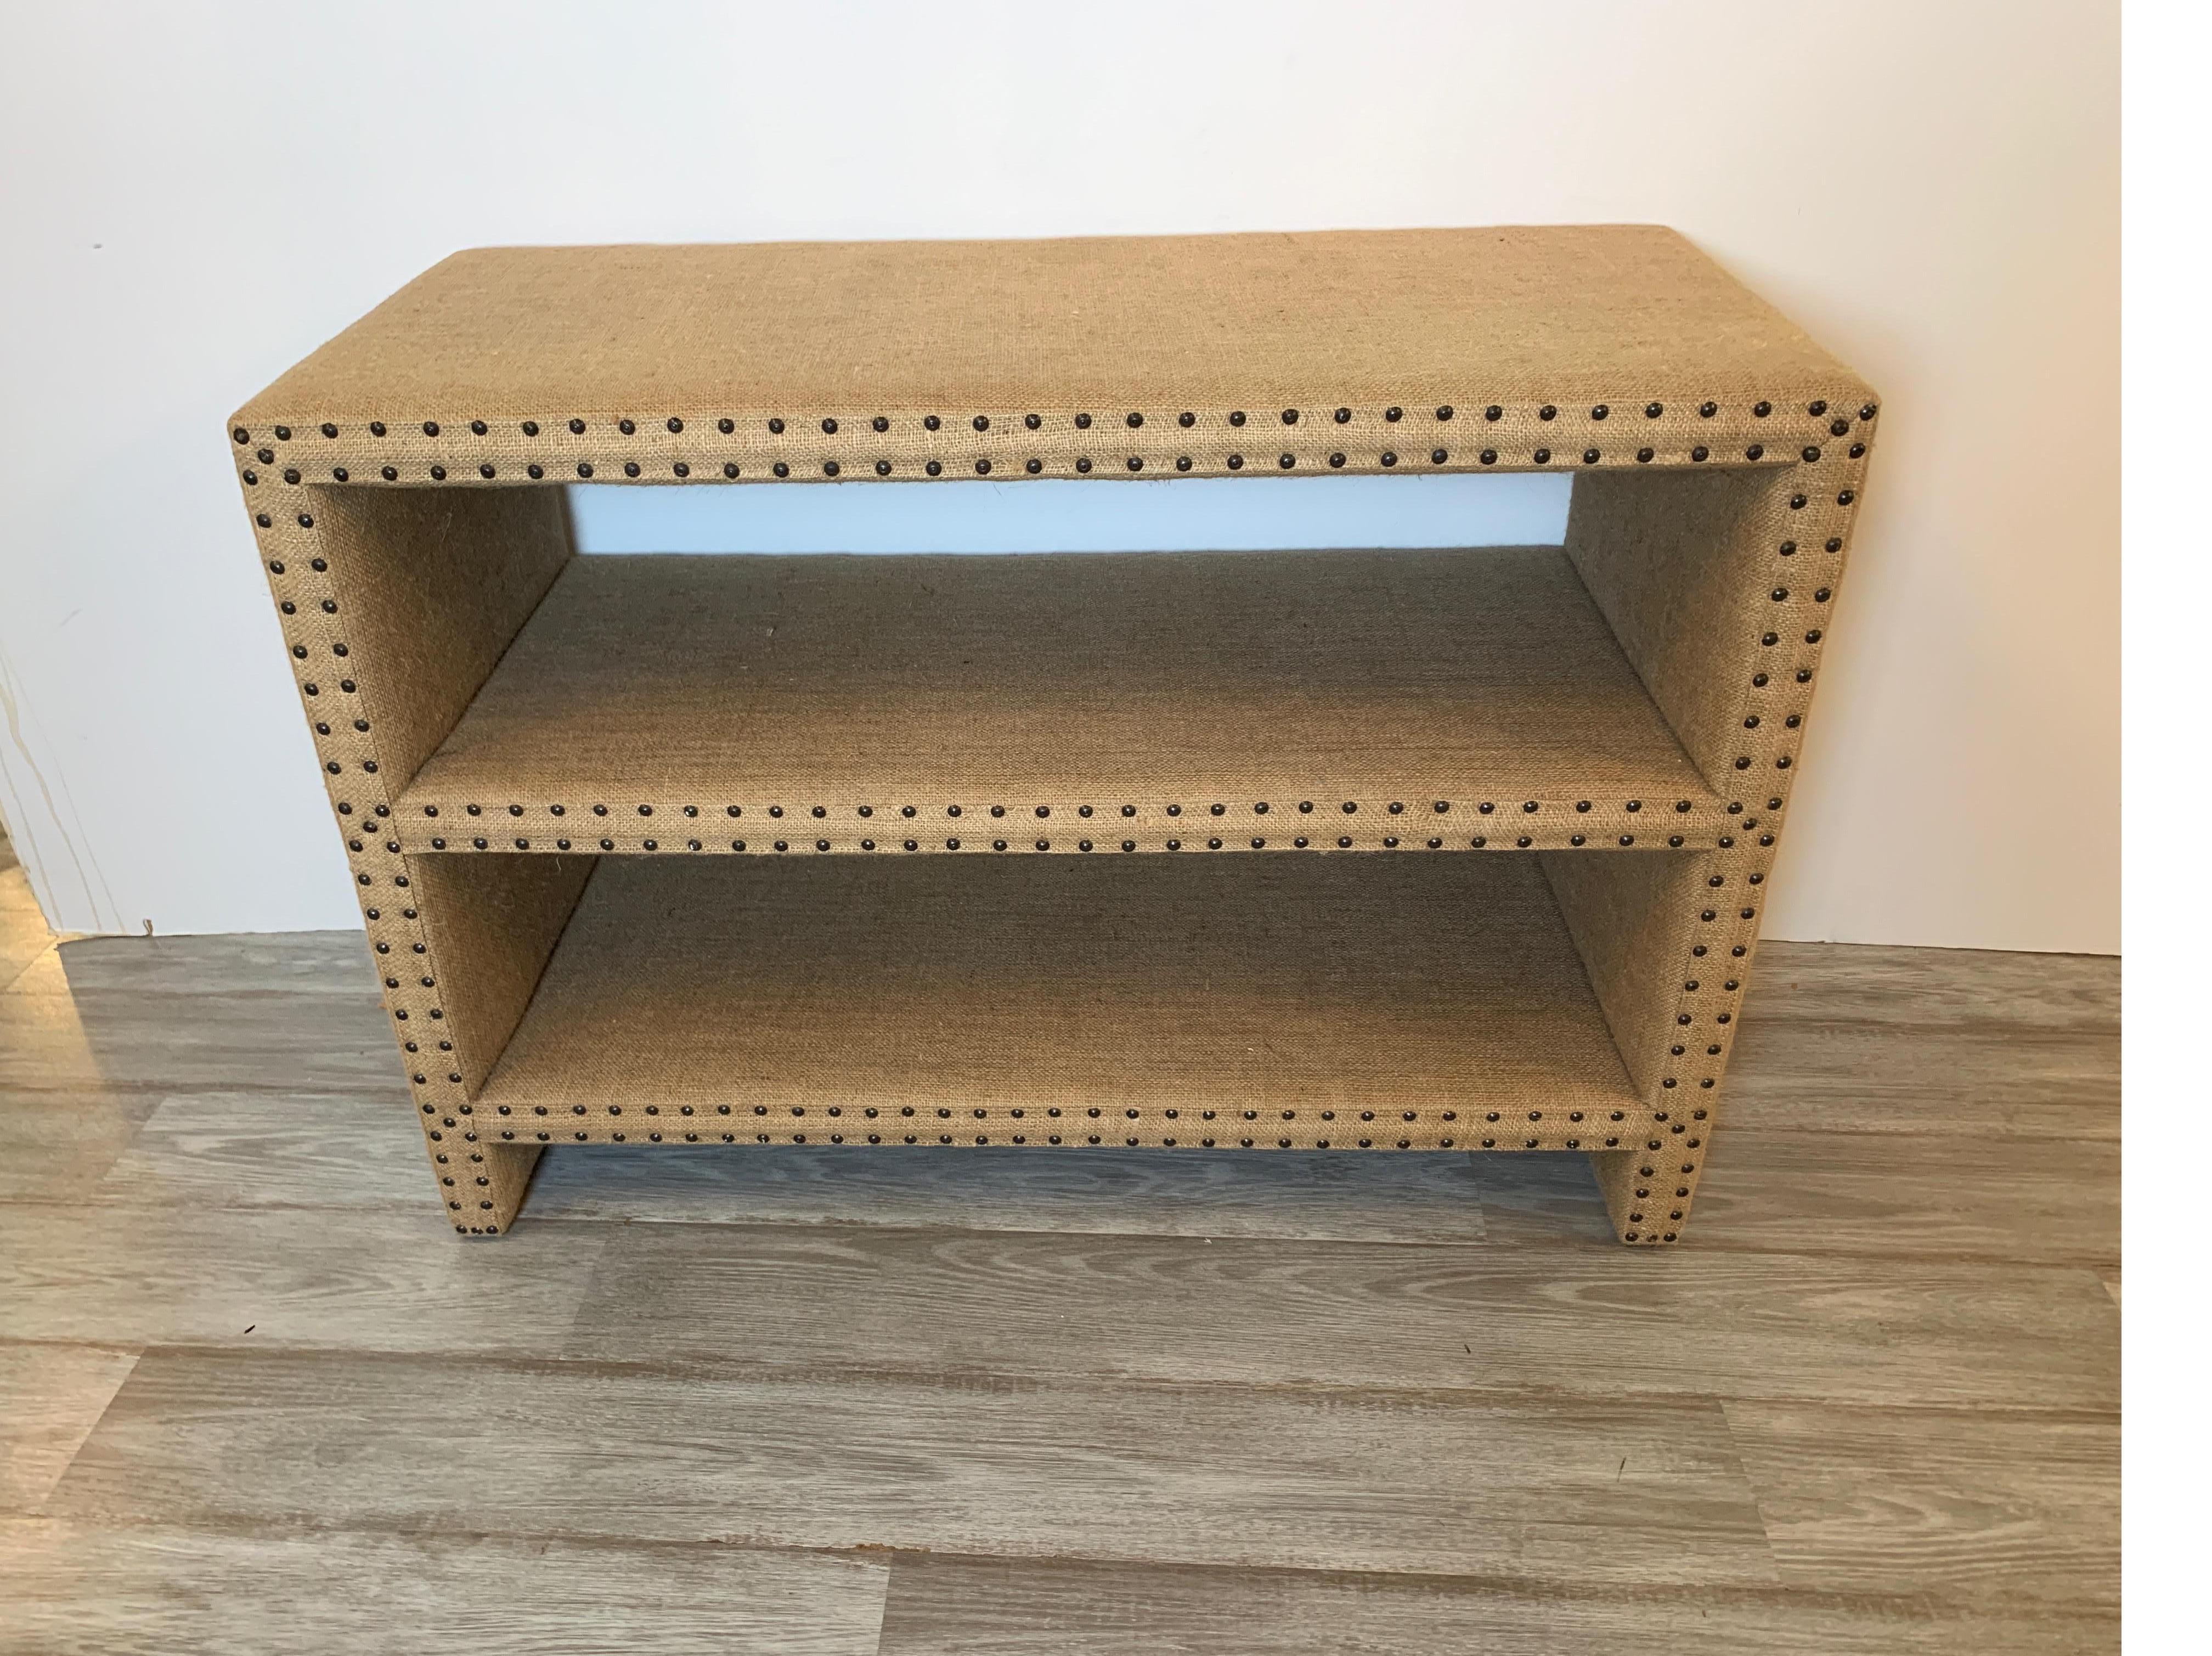 Mecox Parsons style bookshelf or side table upholstered in burlap with nailhead trim.